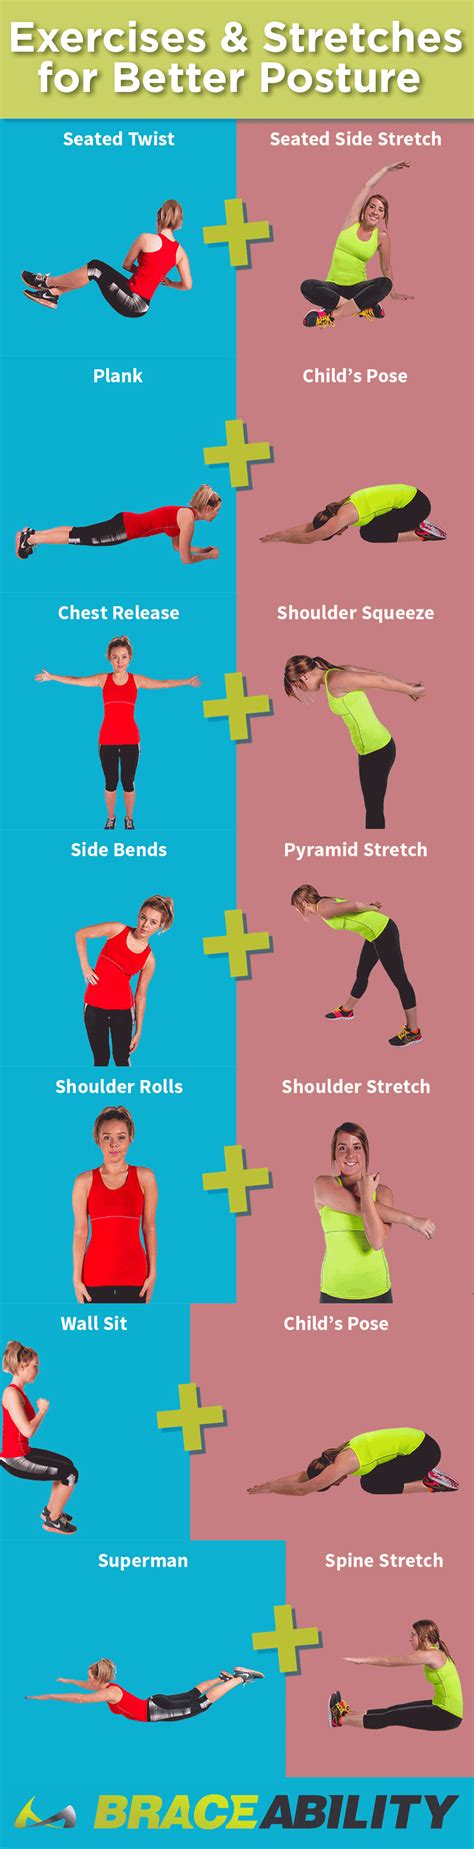 21 Day Posture Challenge Exercises Stretches To Stand Up Straight